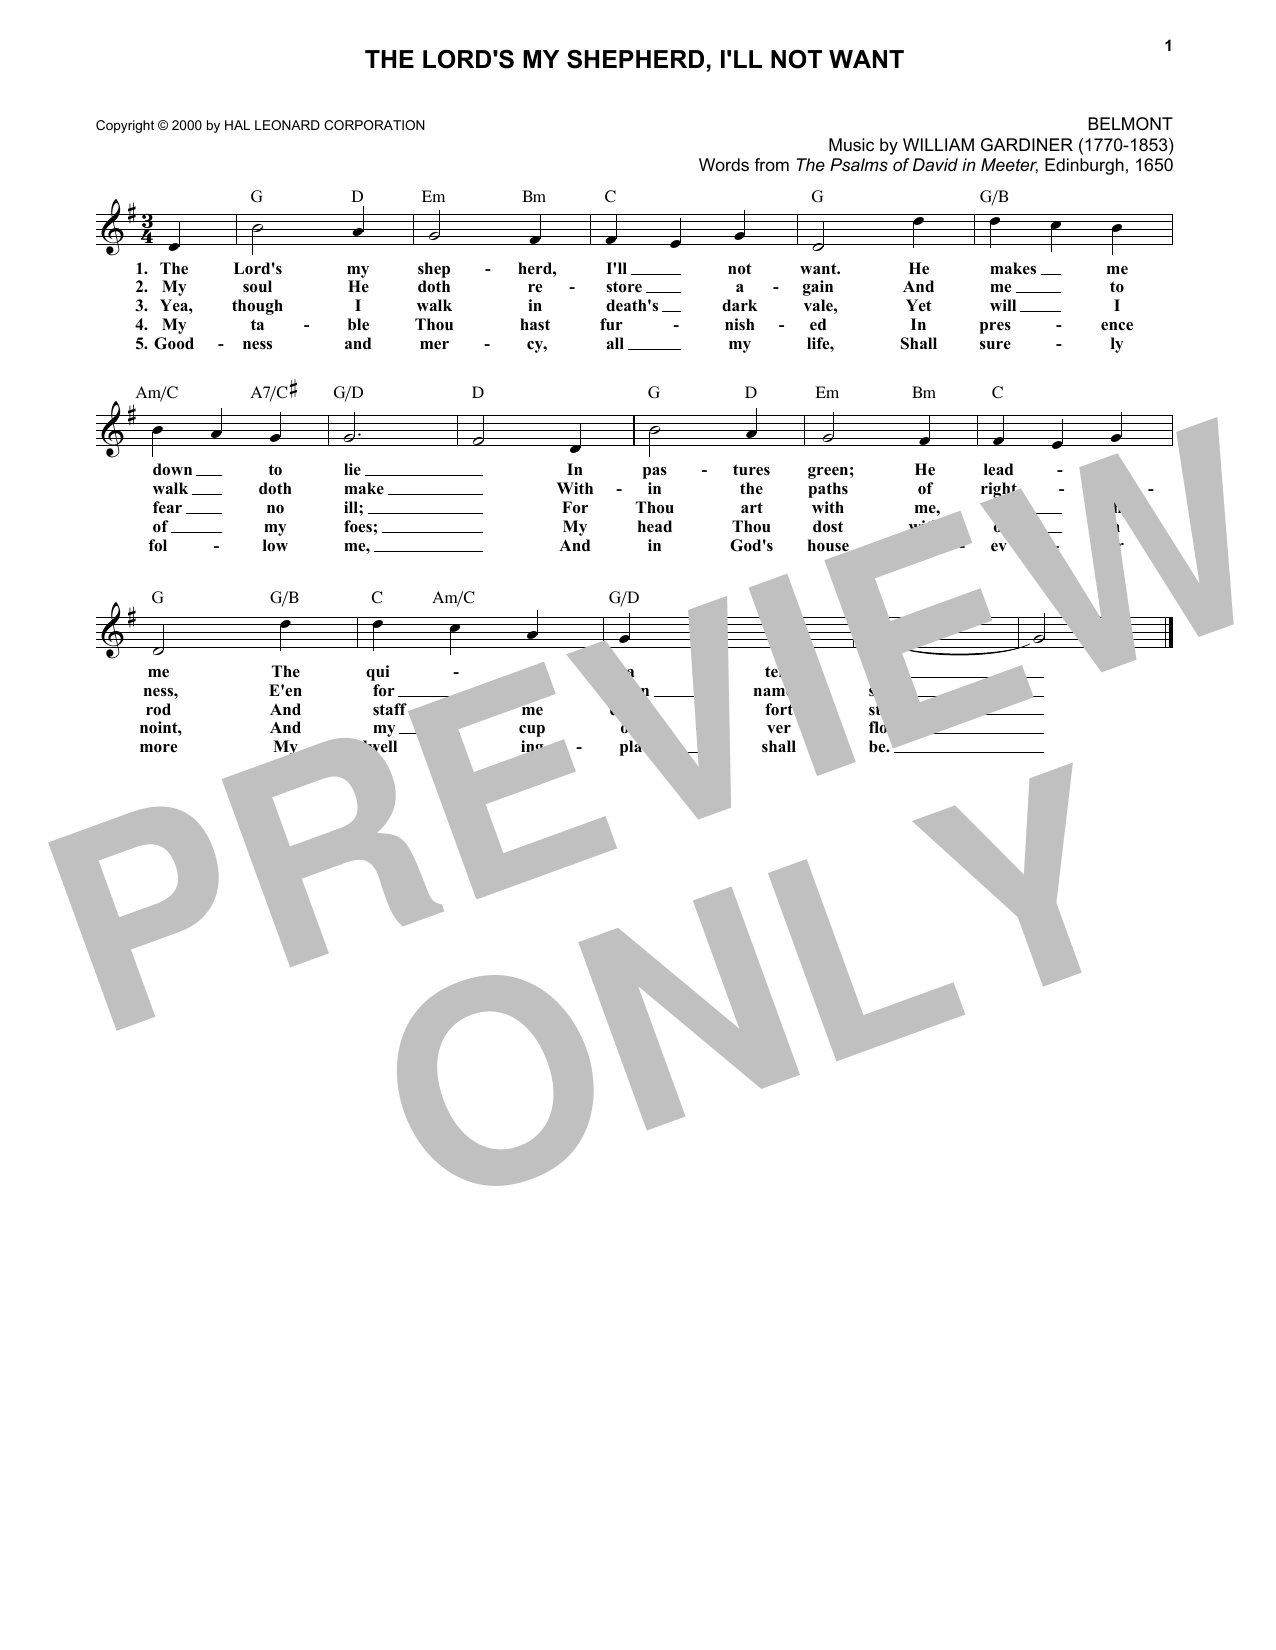 Download Scottish Psalter The Lord's My Shepherd, I'll Not Want Sheet Music